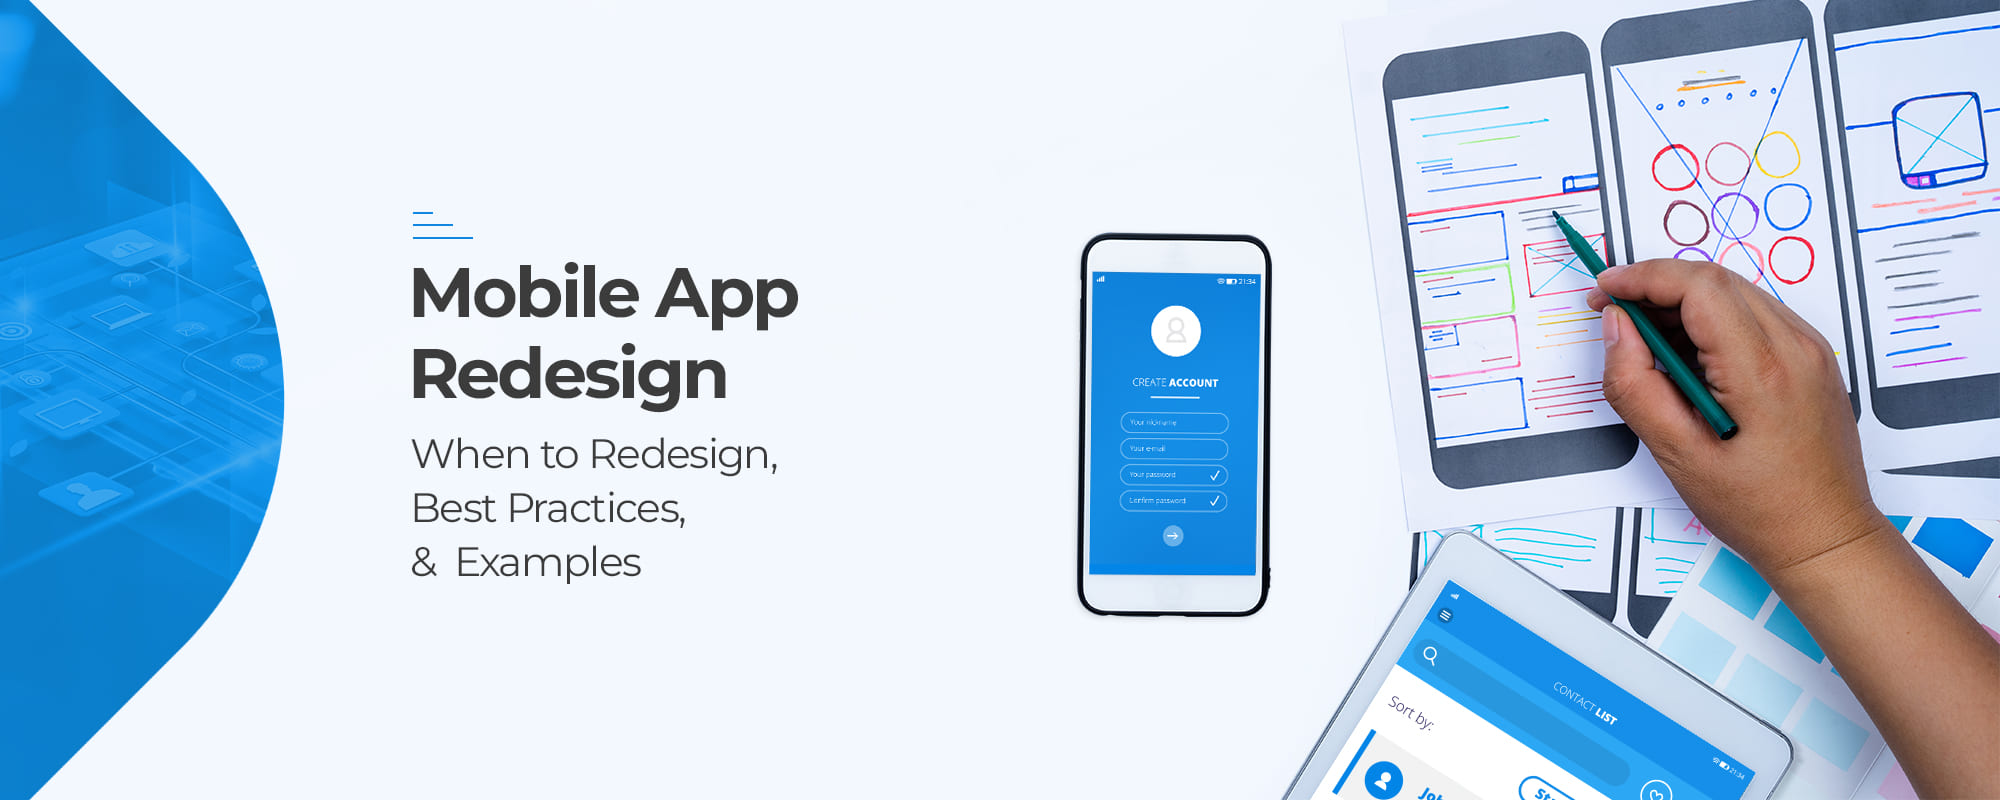 What you Should Know Before Going for Mobile App Redesign?